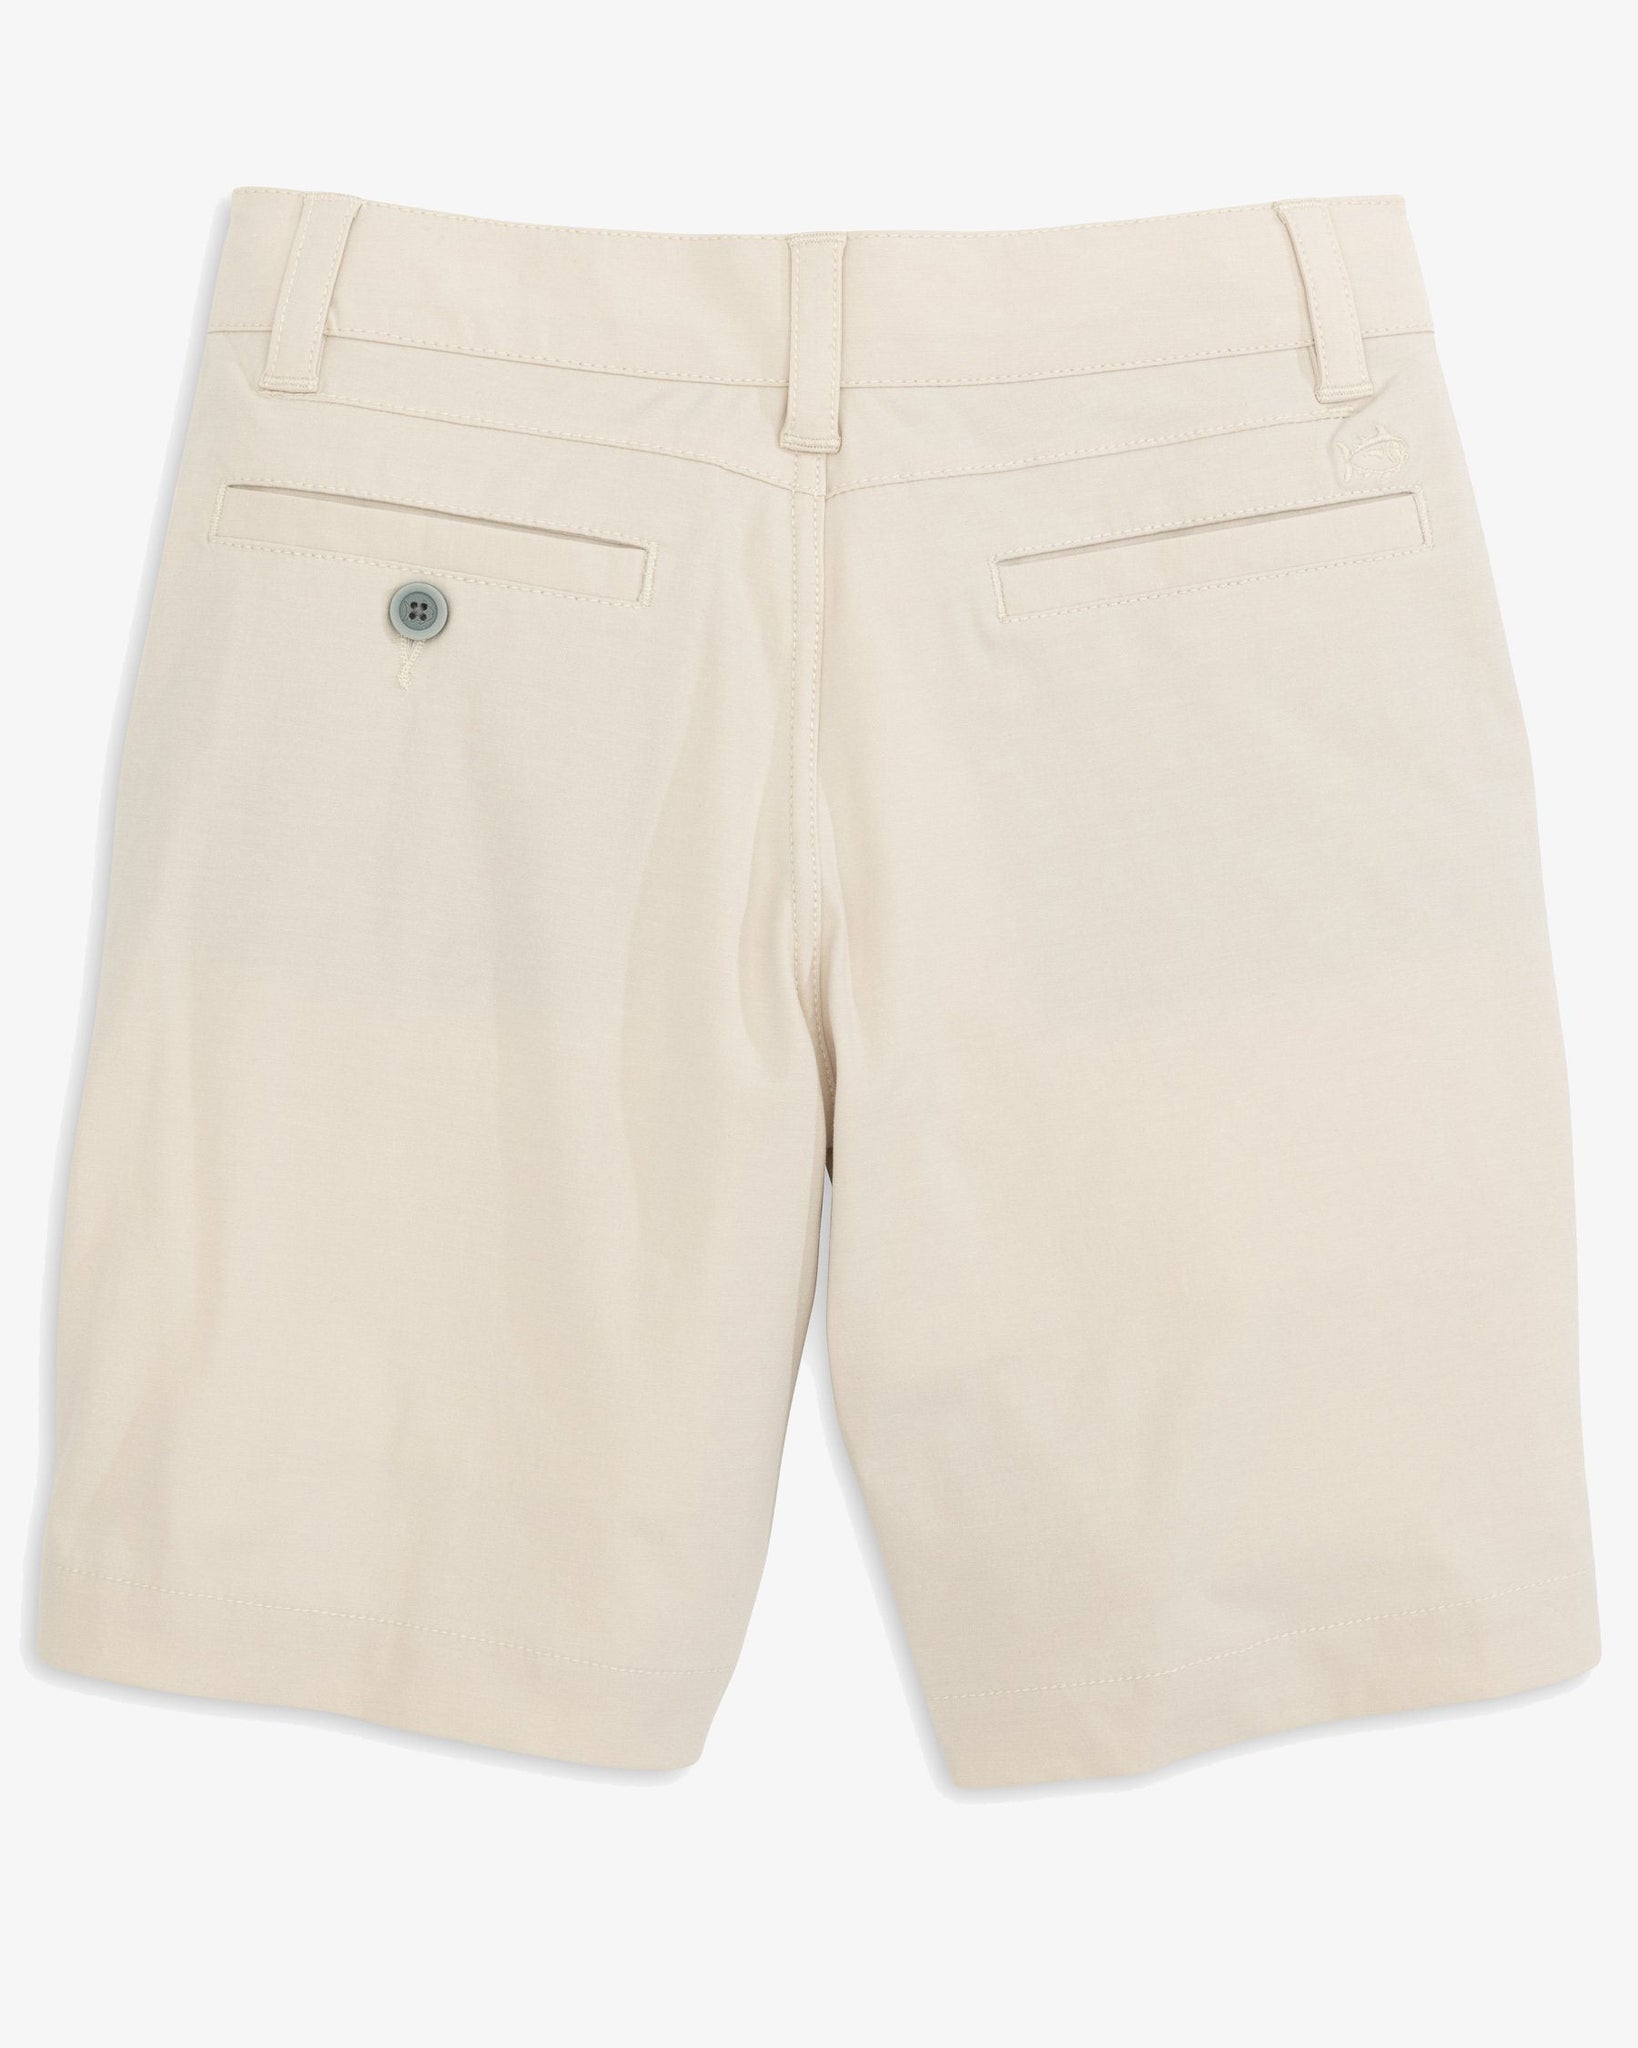 Boys Golf Shorts with Quick Dry Fabric & UV Protection | Southern Tide